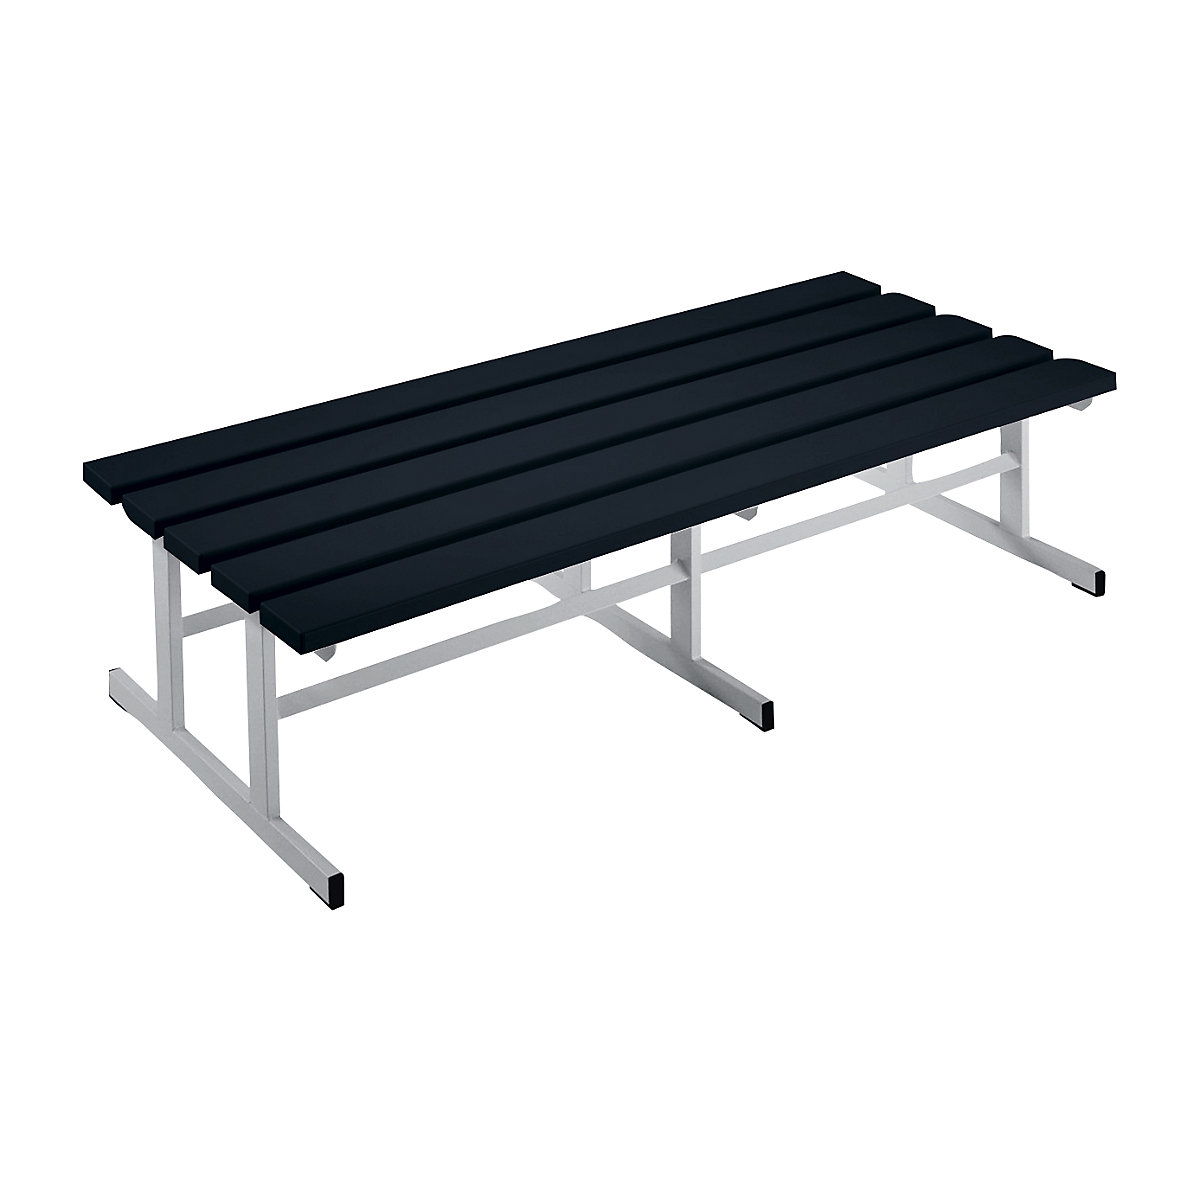 Wolf – Cloakroom bench, double sided seat, black, 1500 mm length